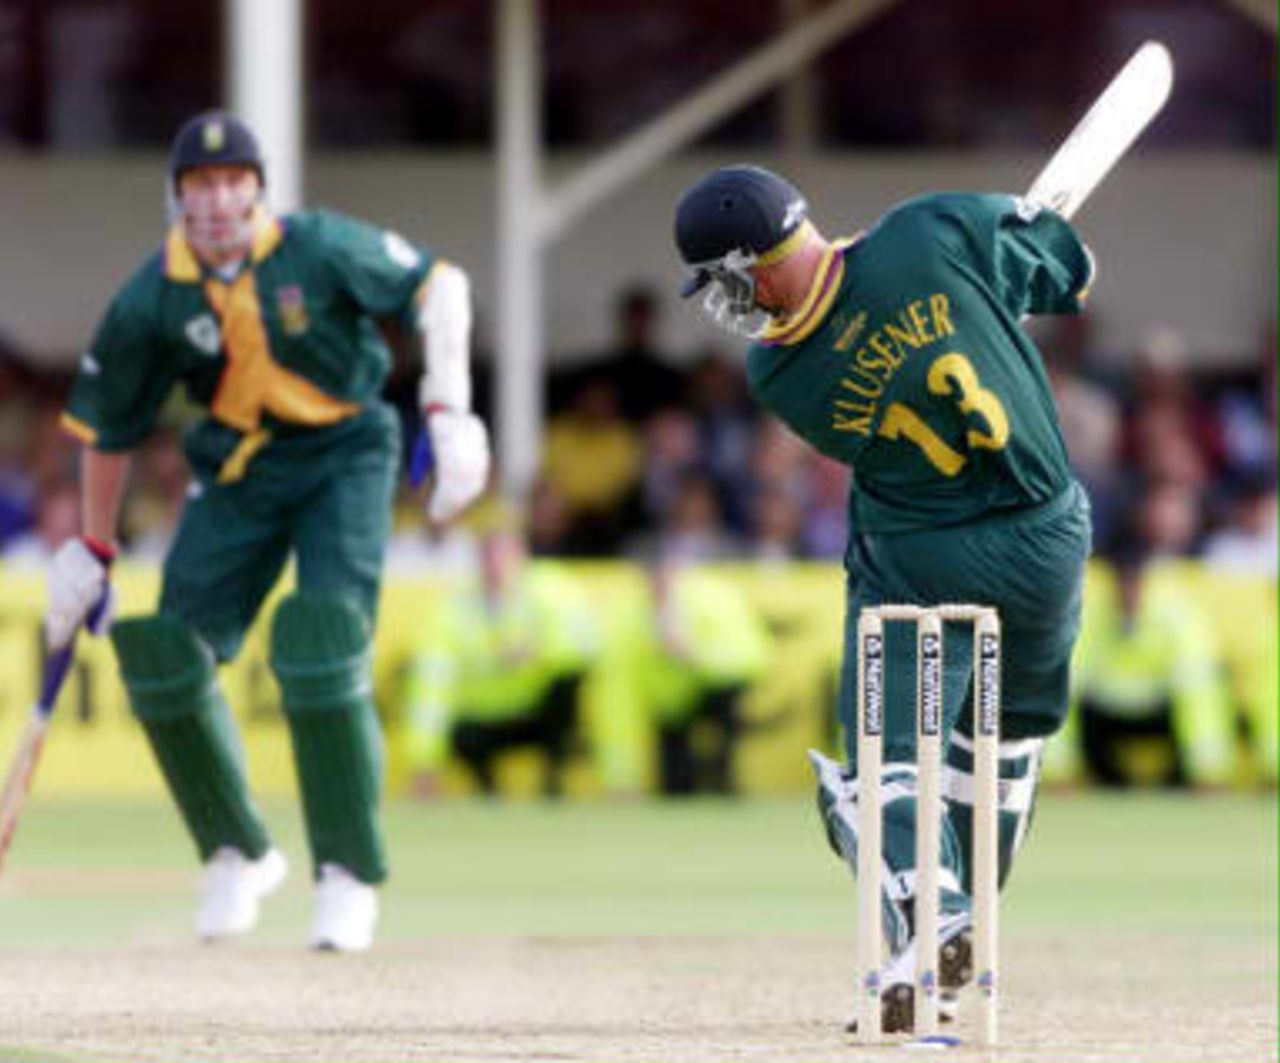 South Africa's Lance Klusener hits out watched by Allan Donald before Australian's victory over South Africa during their semi-final match in the Cricket World Cup at Edgbaston, Birmingham, 17 June 1999.